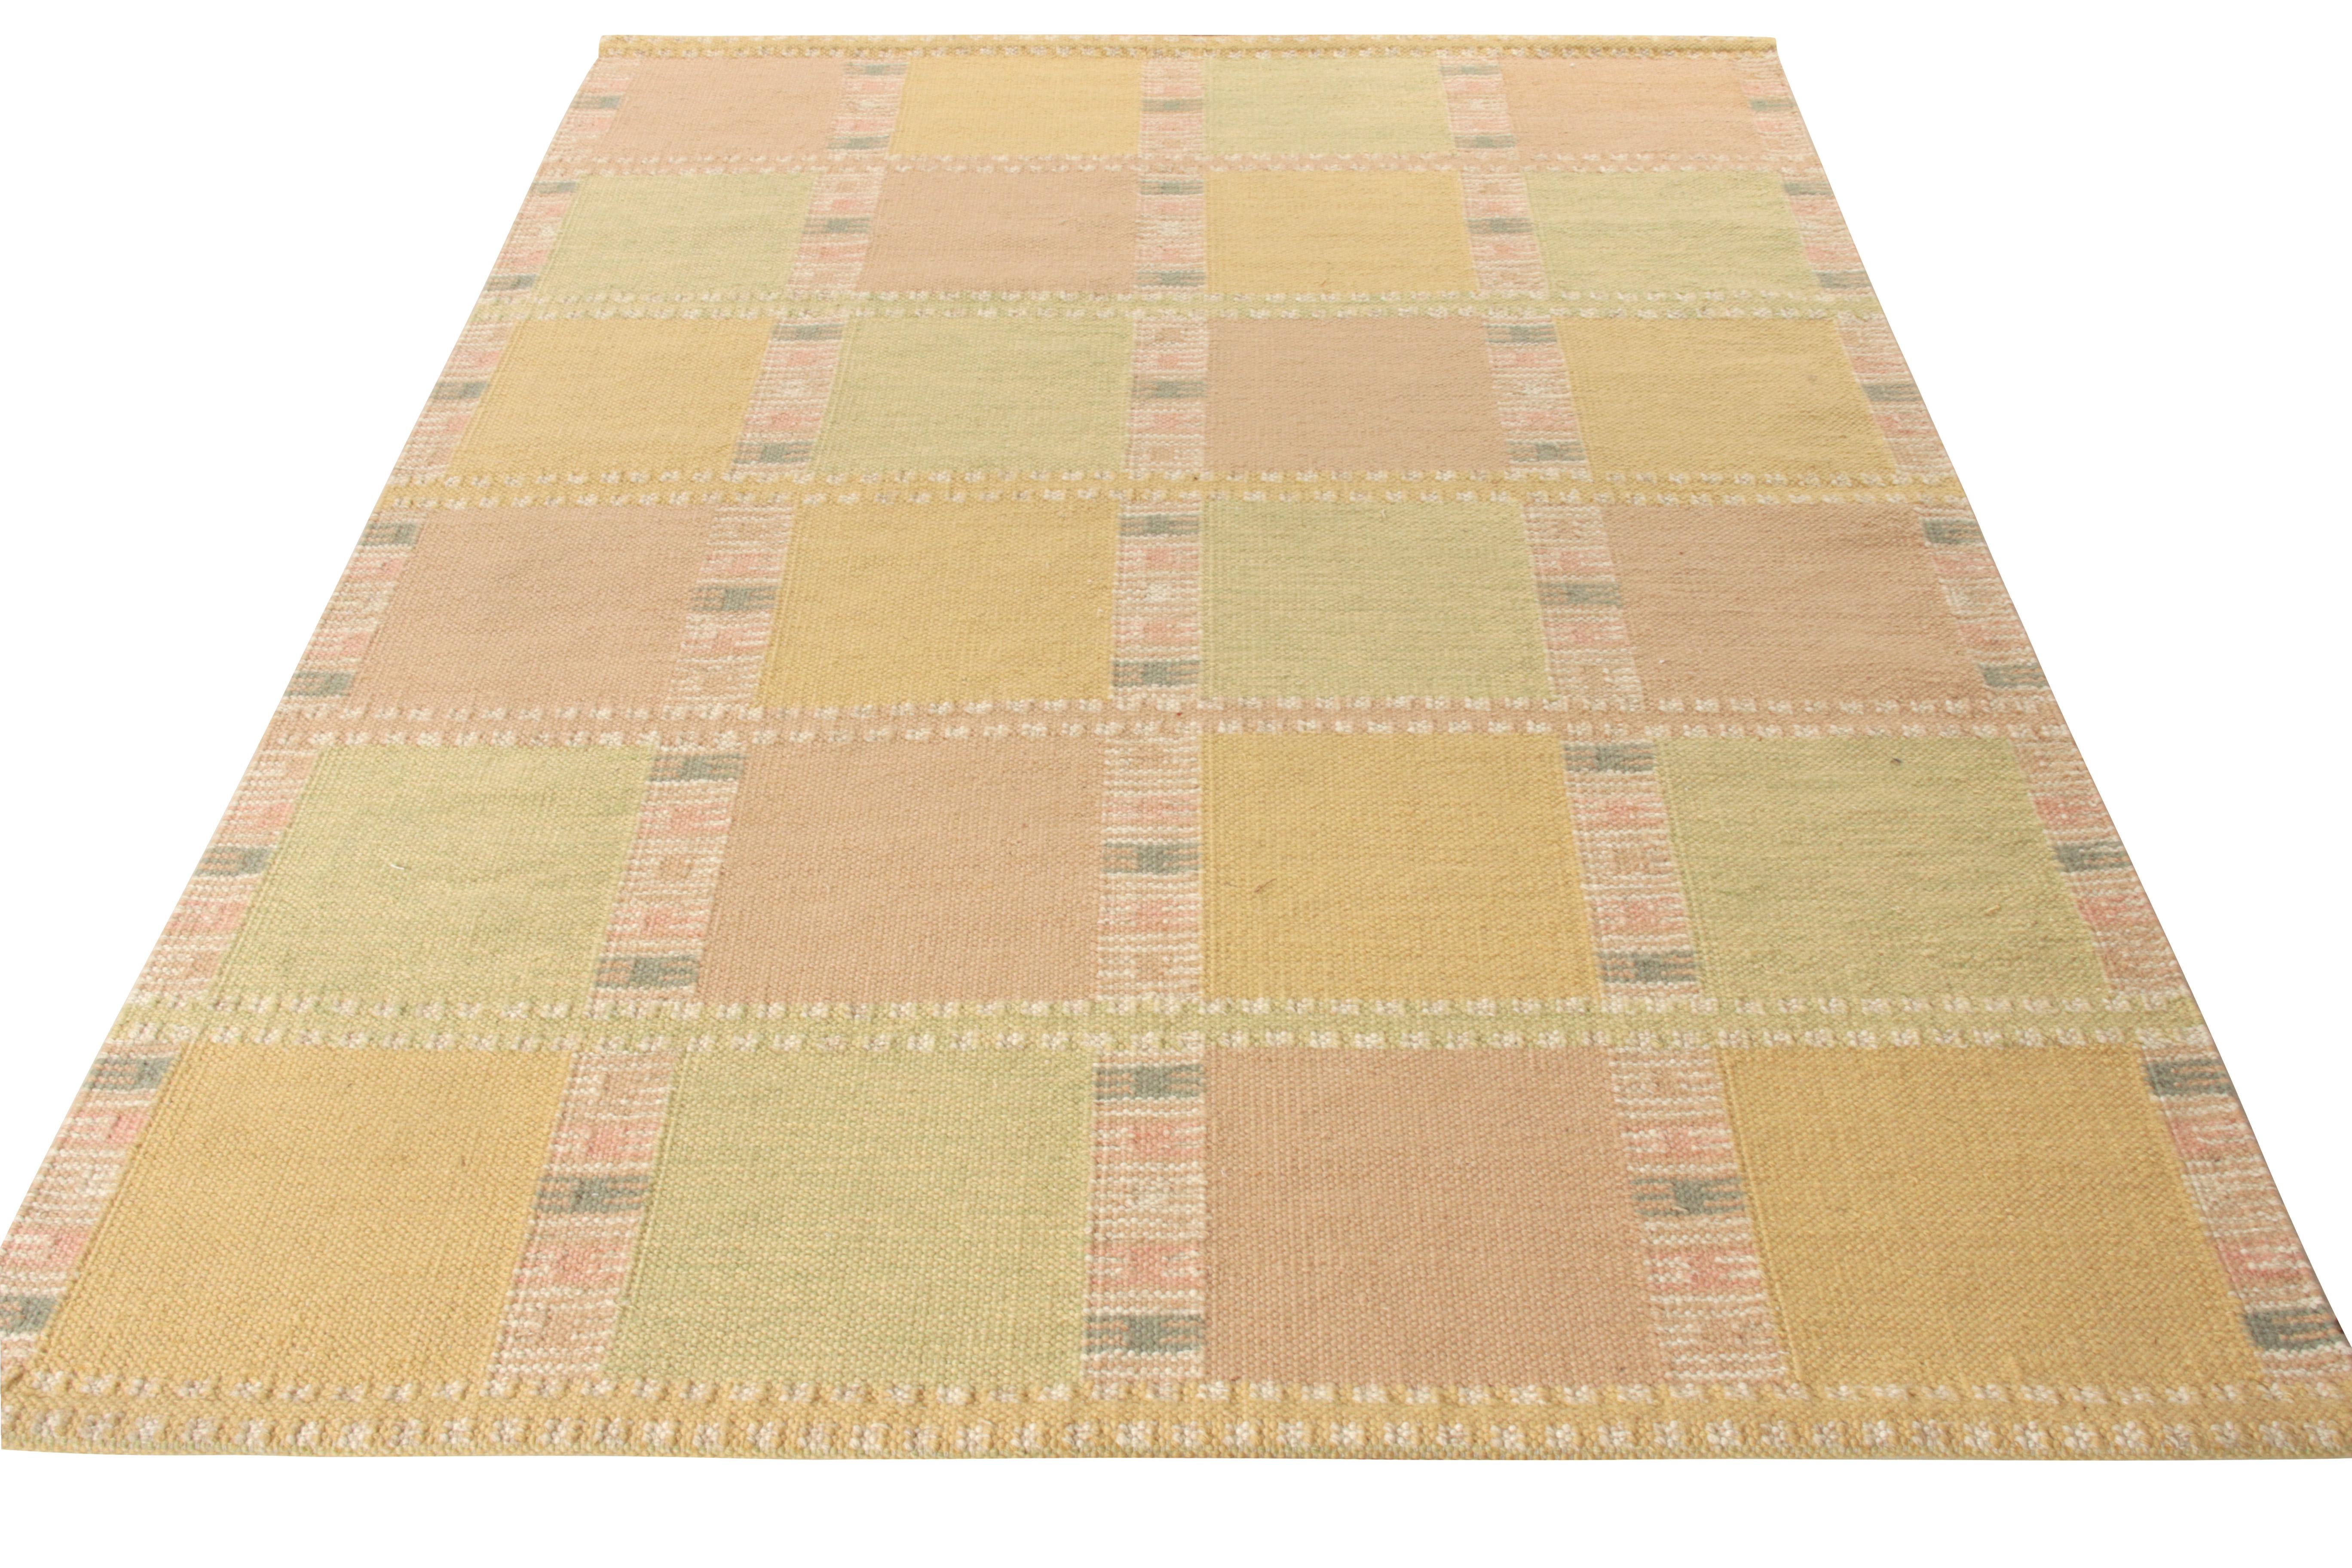 Rug & Kilim presents a handwoven wool 6 x 8 Kilim from the team’s award-winning Scandinavian flat weave collection. Witnessing a symmetric geometric pattern in shades of golden-yellow, green, pink and off-white, the rug enjoys a scintillating sense